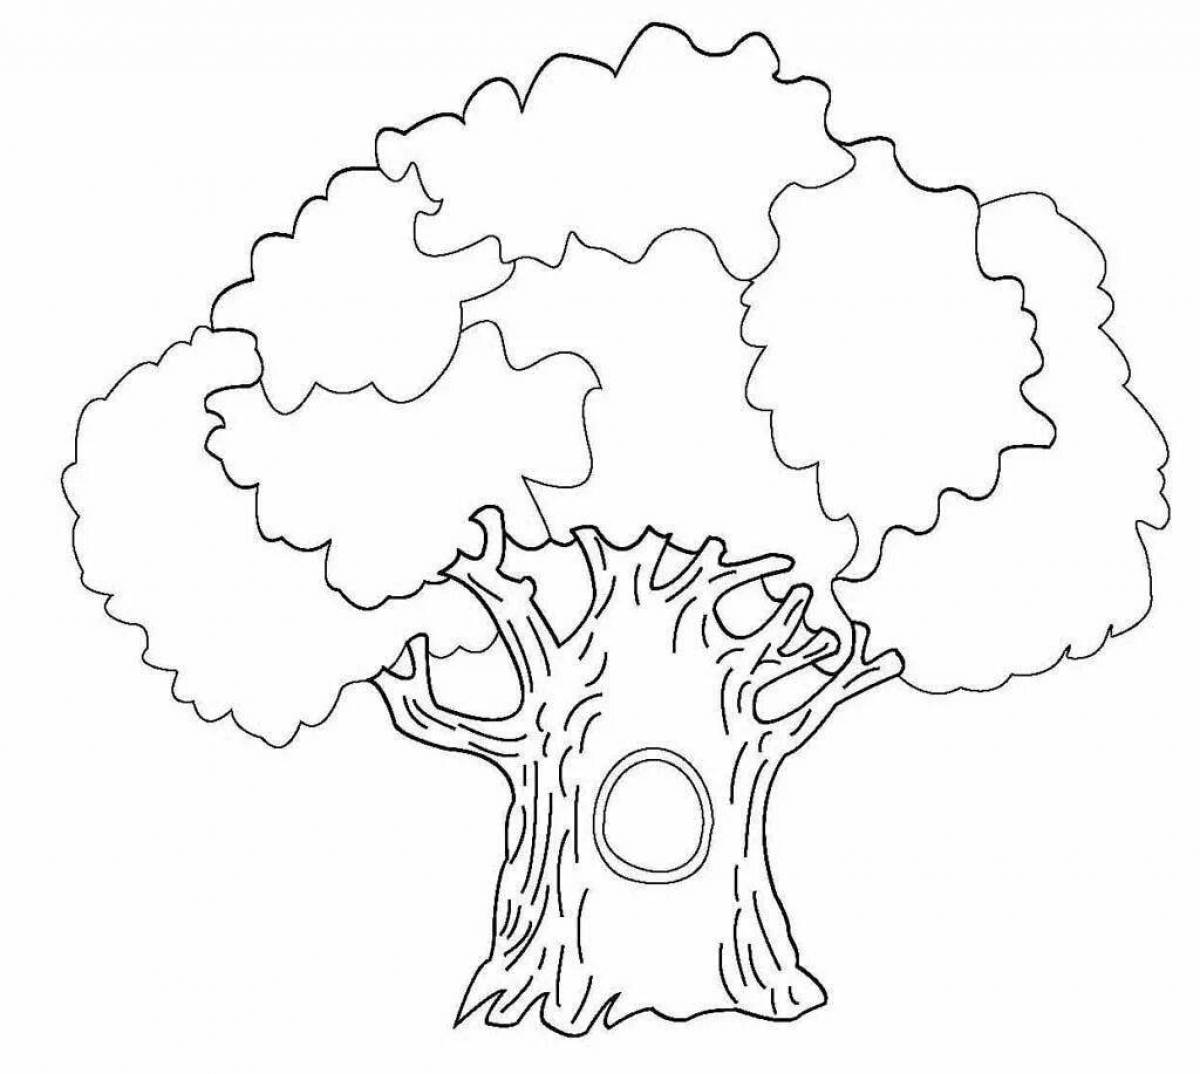 Funny oak tree coloring book for kids